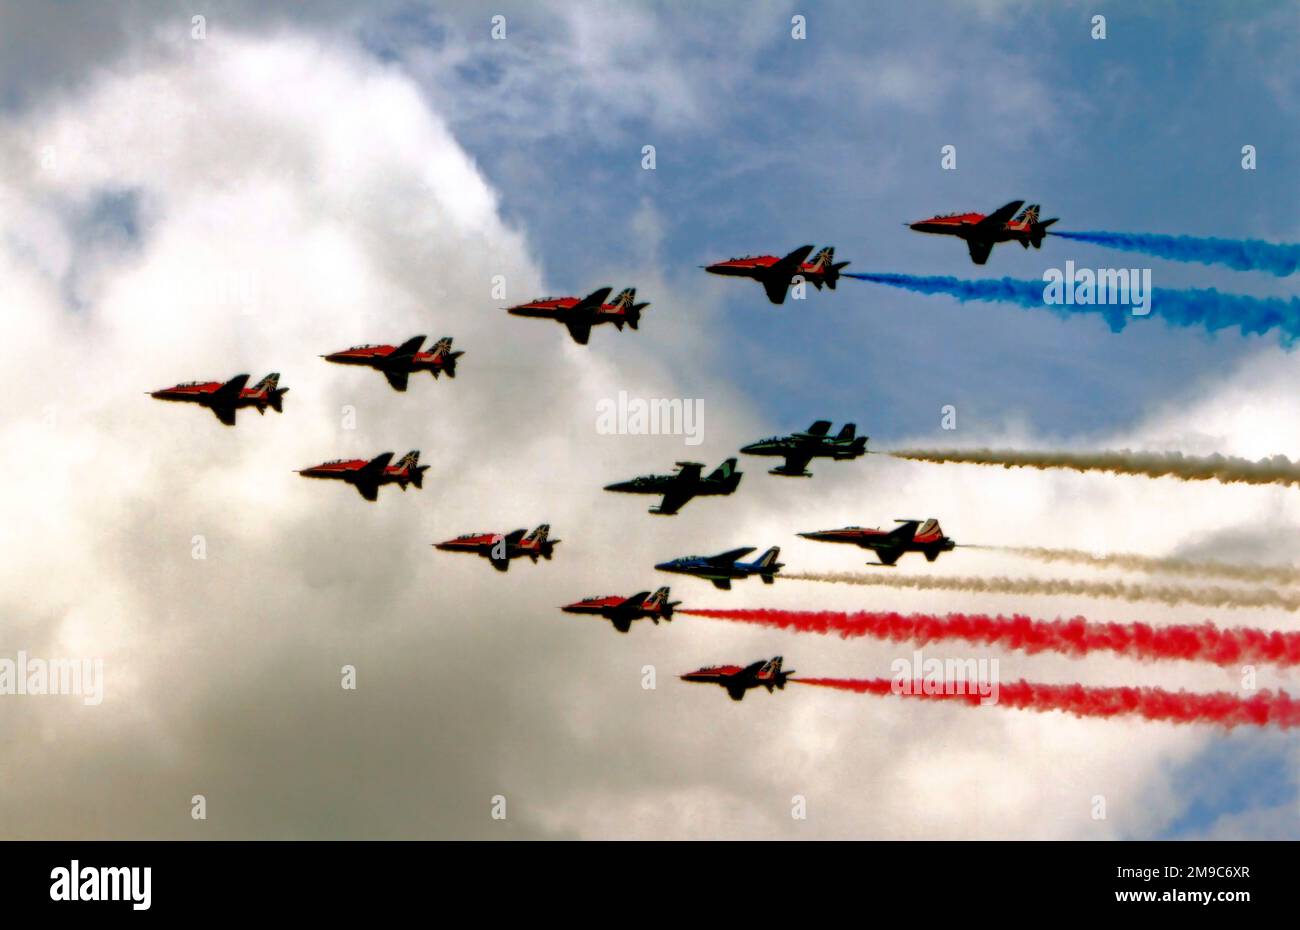 The Red Arrows 50th Anniversary Flypast with Leader of the Patrouille Suisse, Breitling Jet Team, Patrouille de France and Frecce Tricolori at the Royal International Air Tattoo 2014 Stock Photo